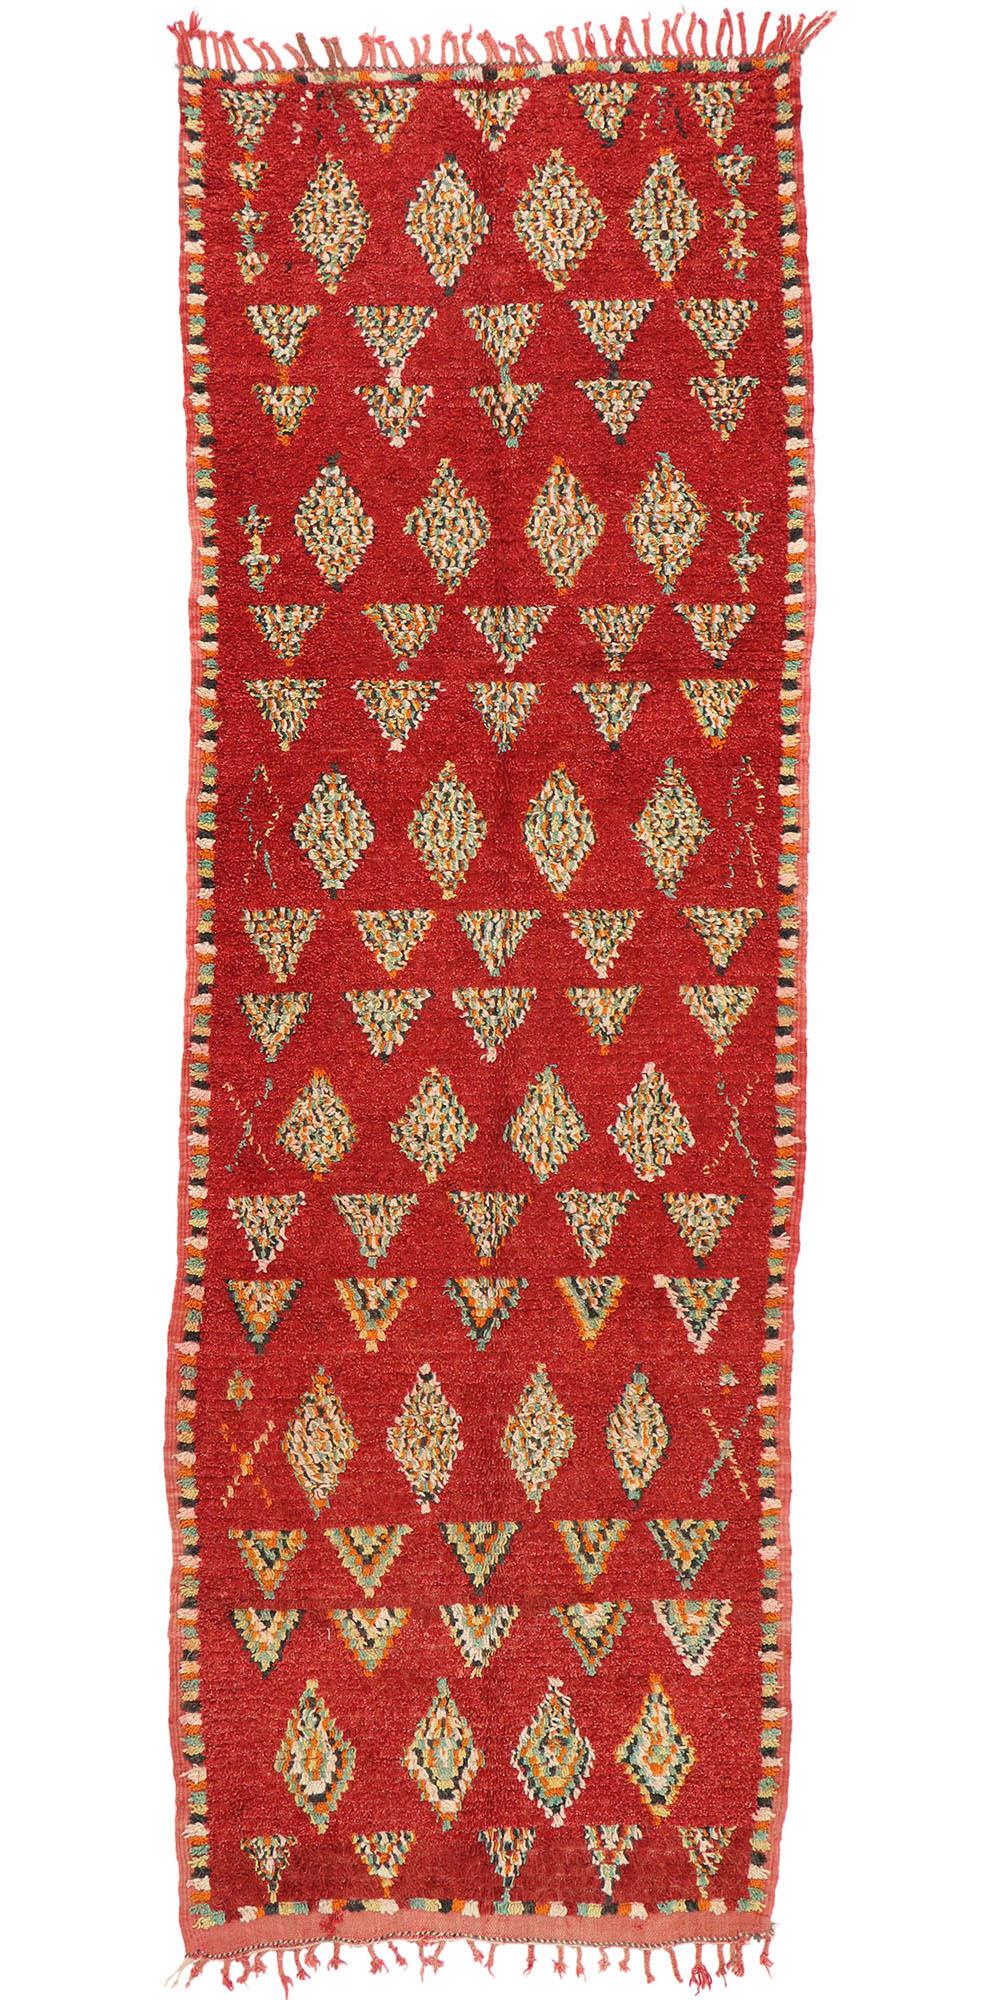 Vintage Berber Moroccan Azilal Rug, Boho Chic Meets Cozy Tribal Enchantment For Sale 3